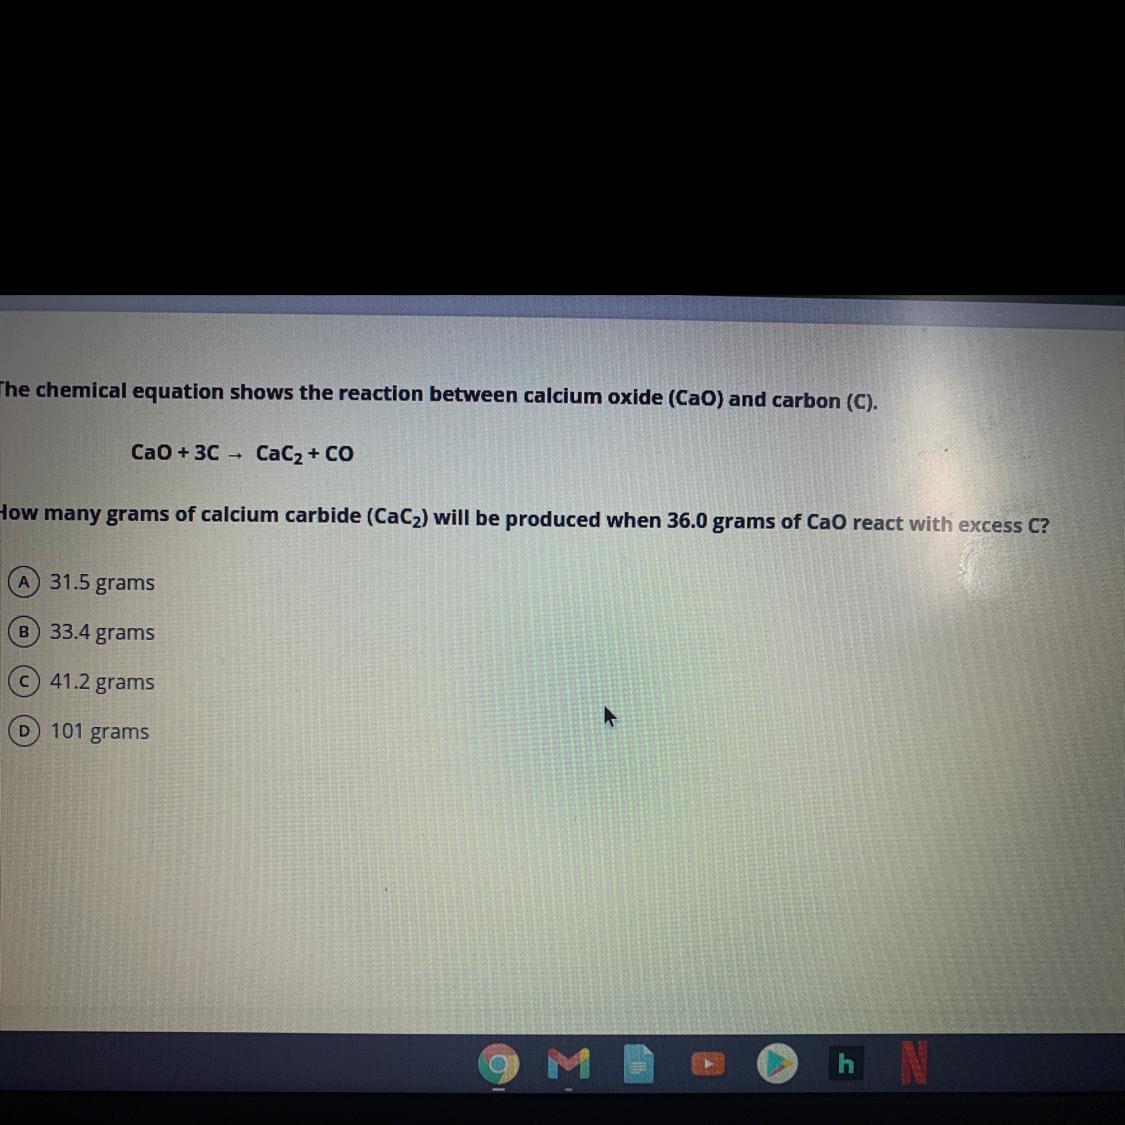 Can Anybody Do This?